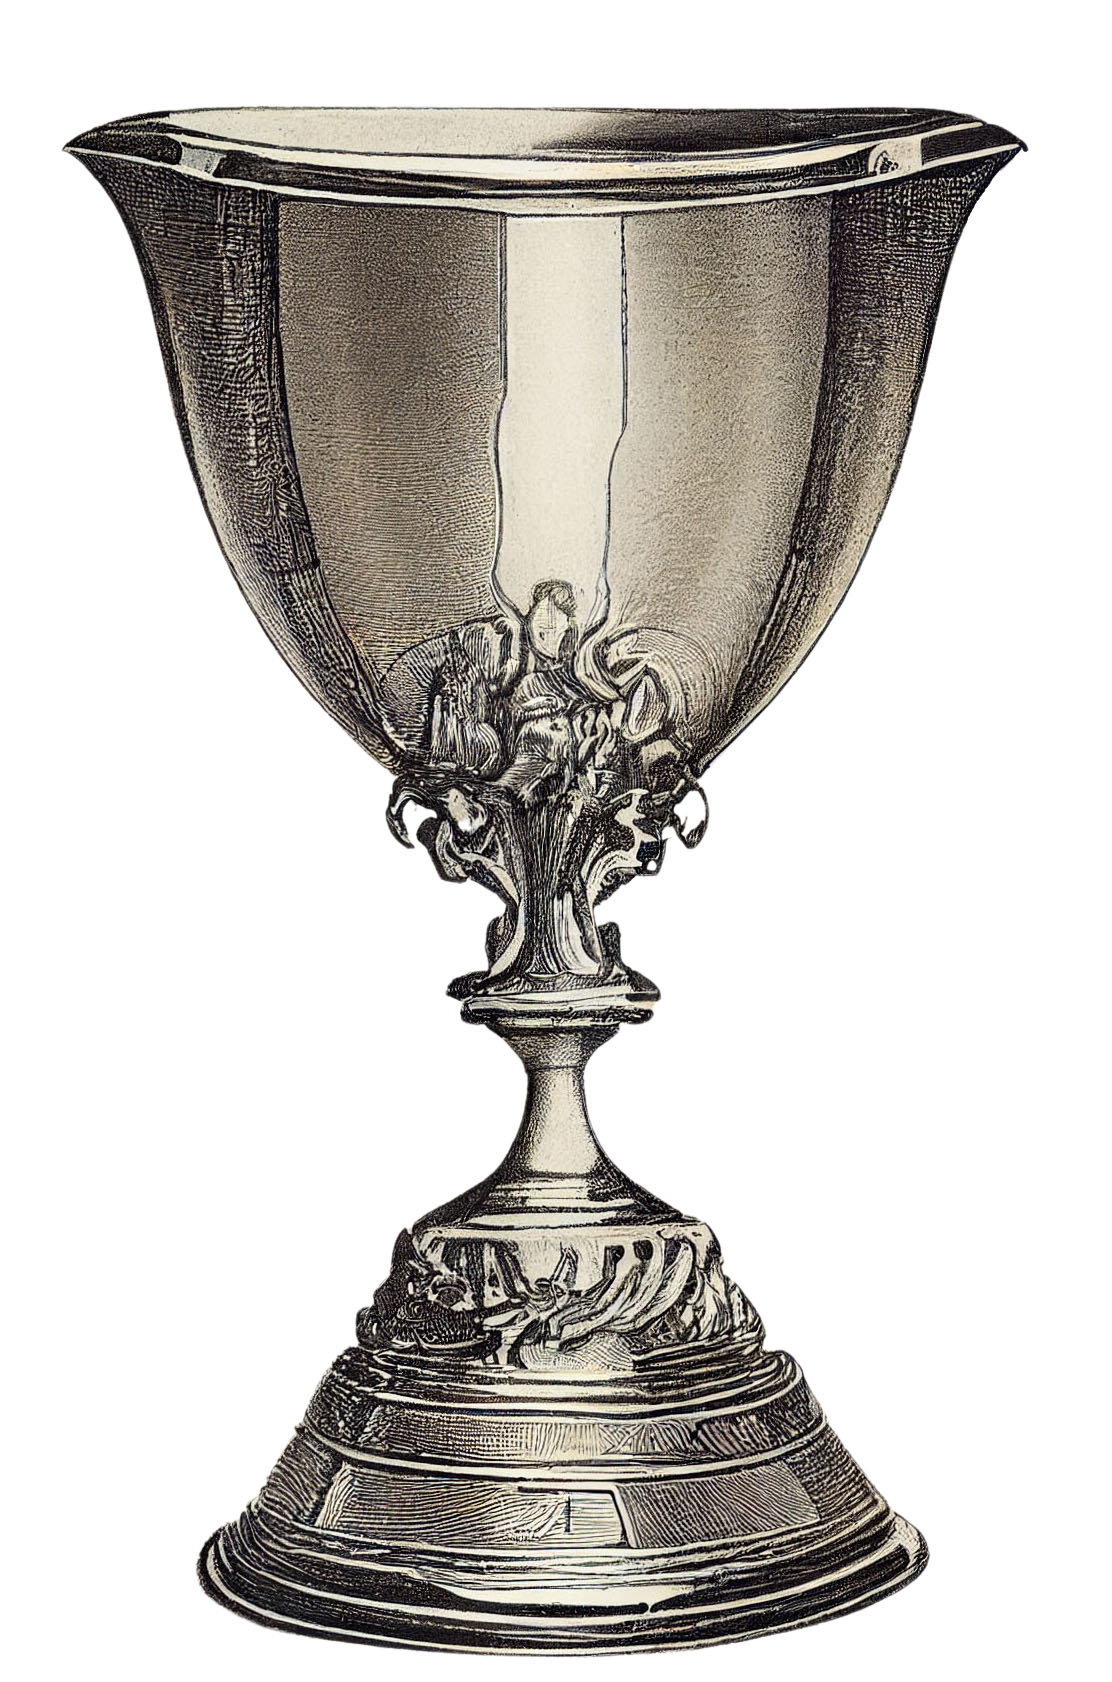 Silver Trophy Clipart